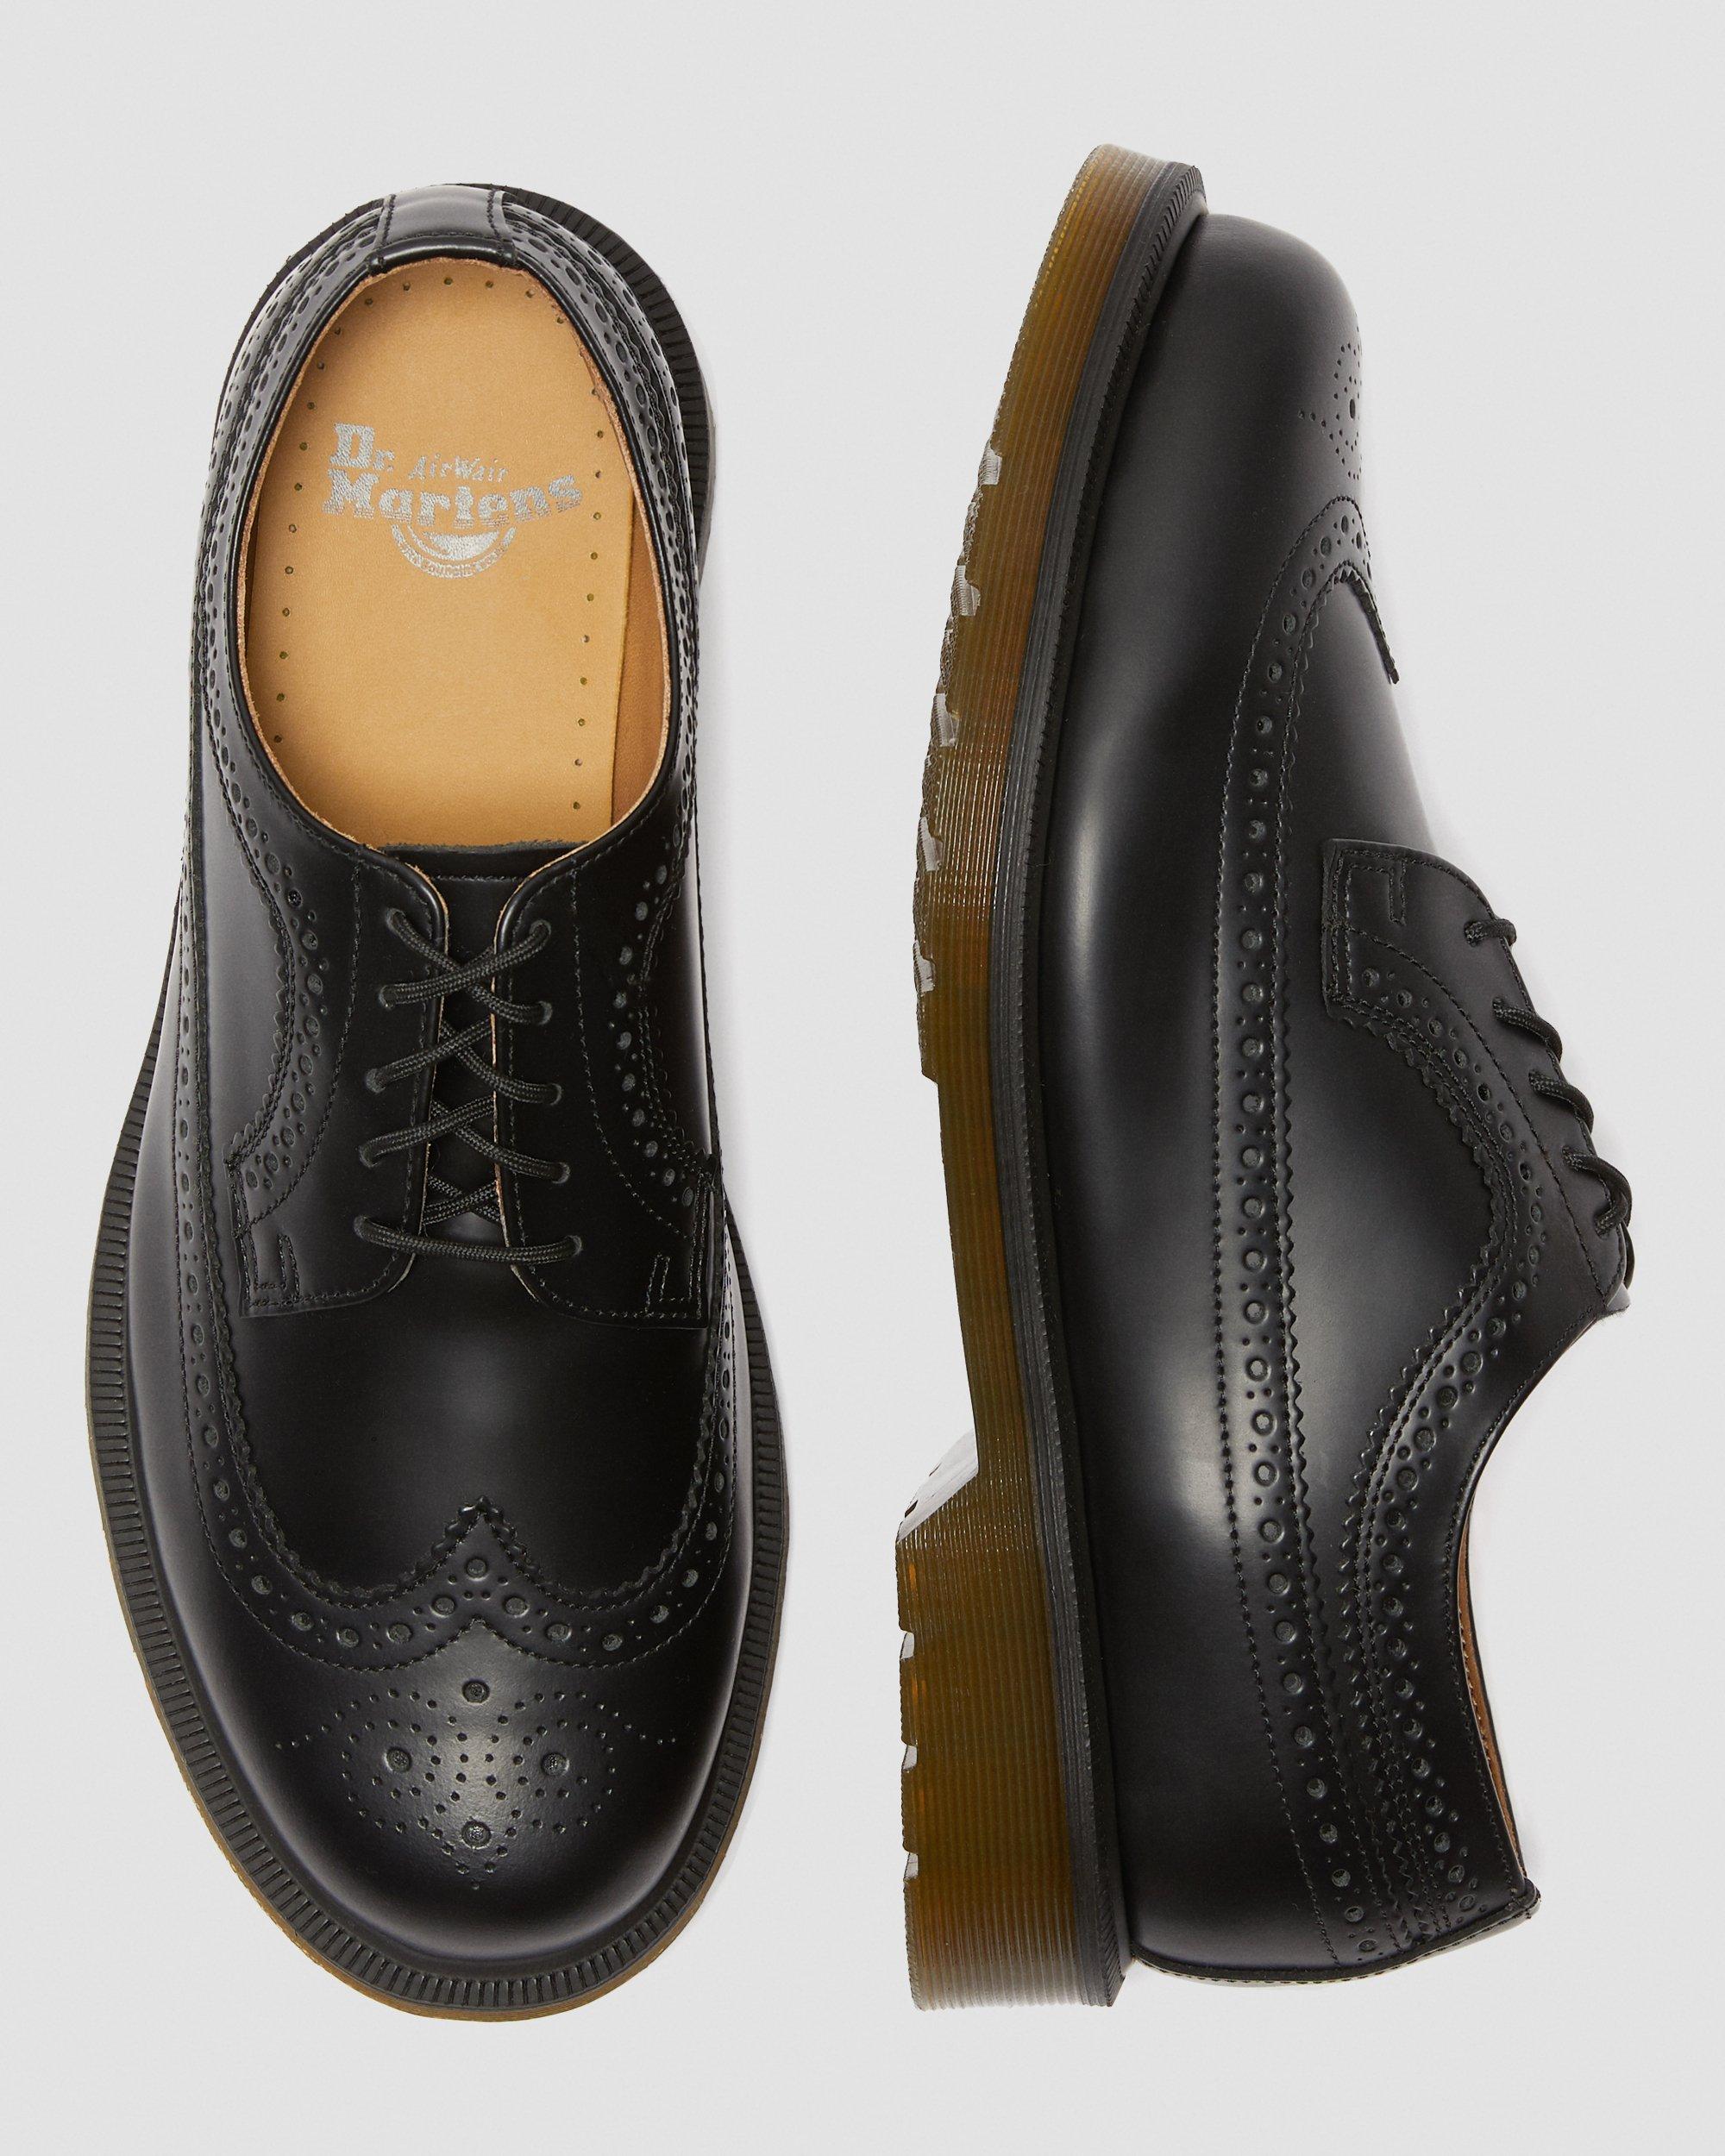 3989 Smooth Leather Brogue Shoes in Black